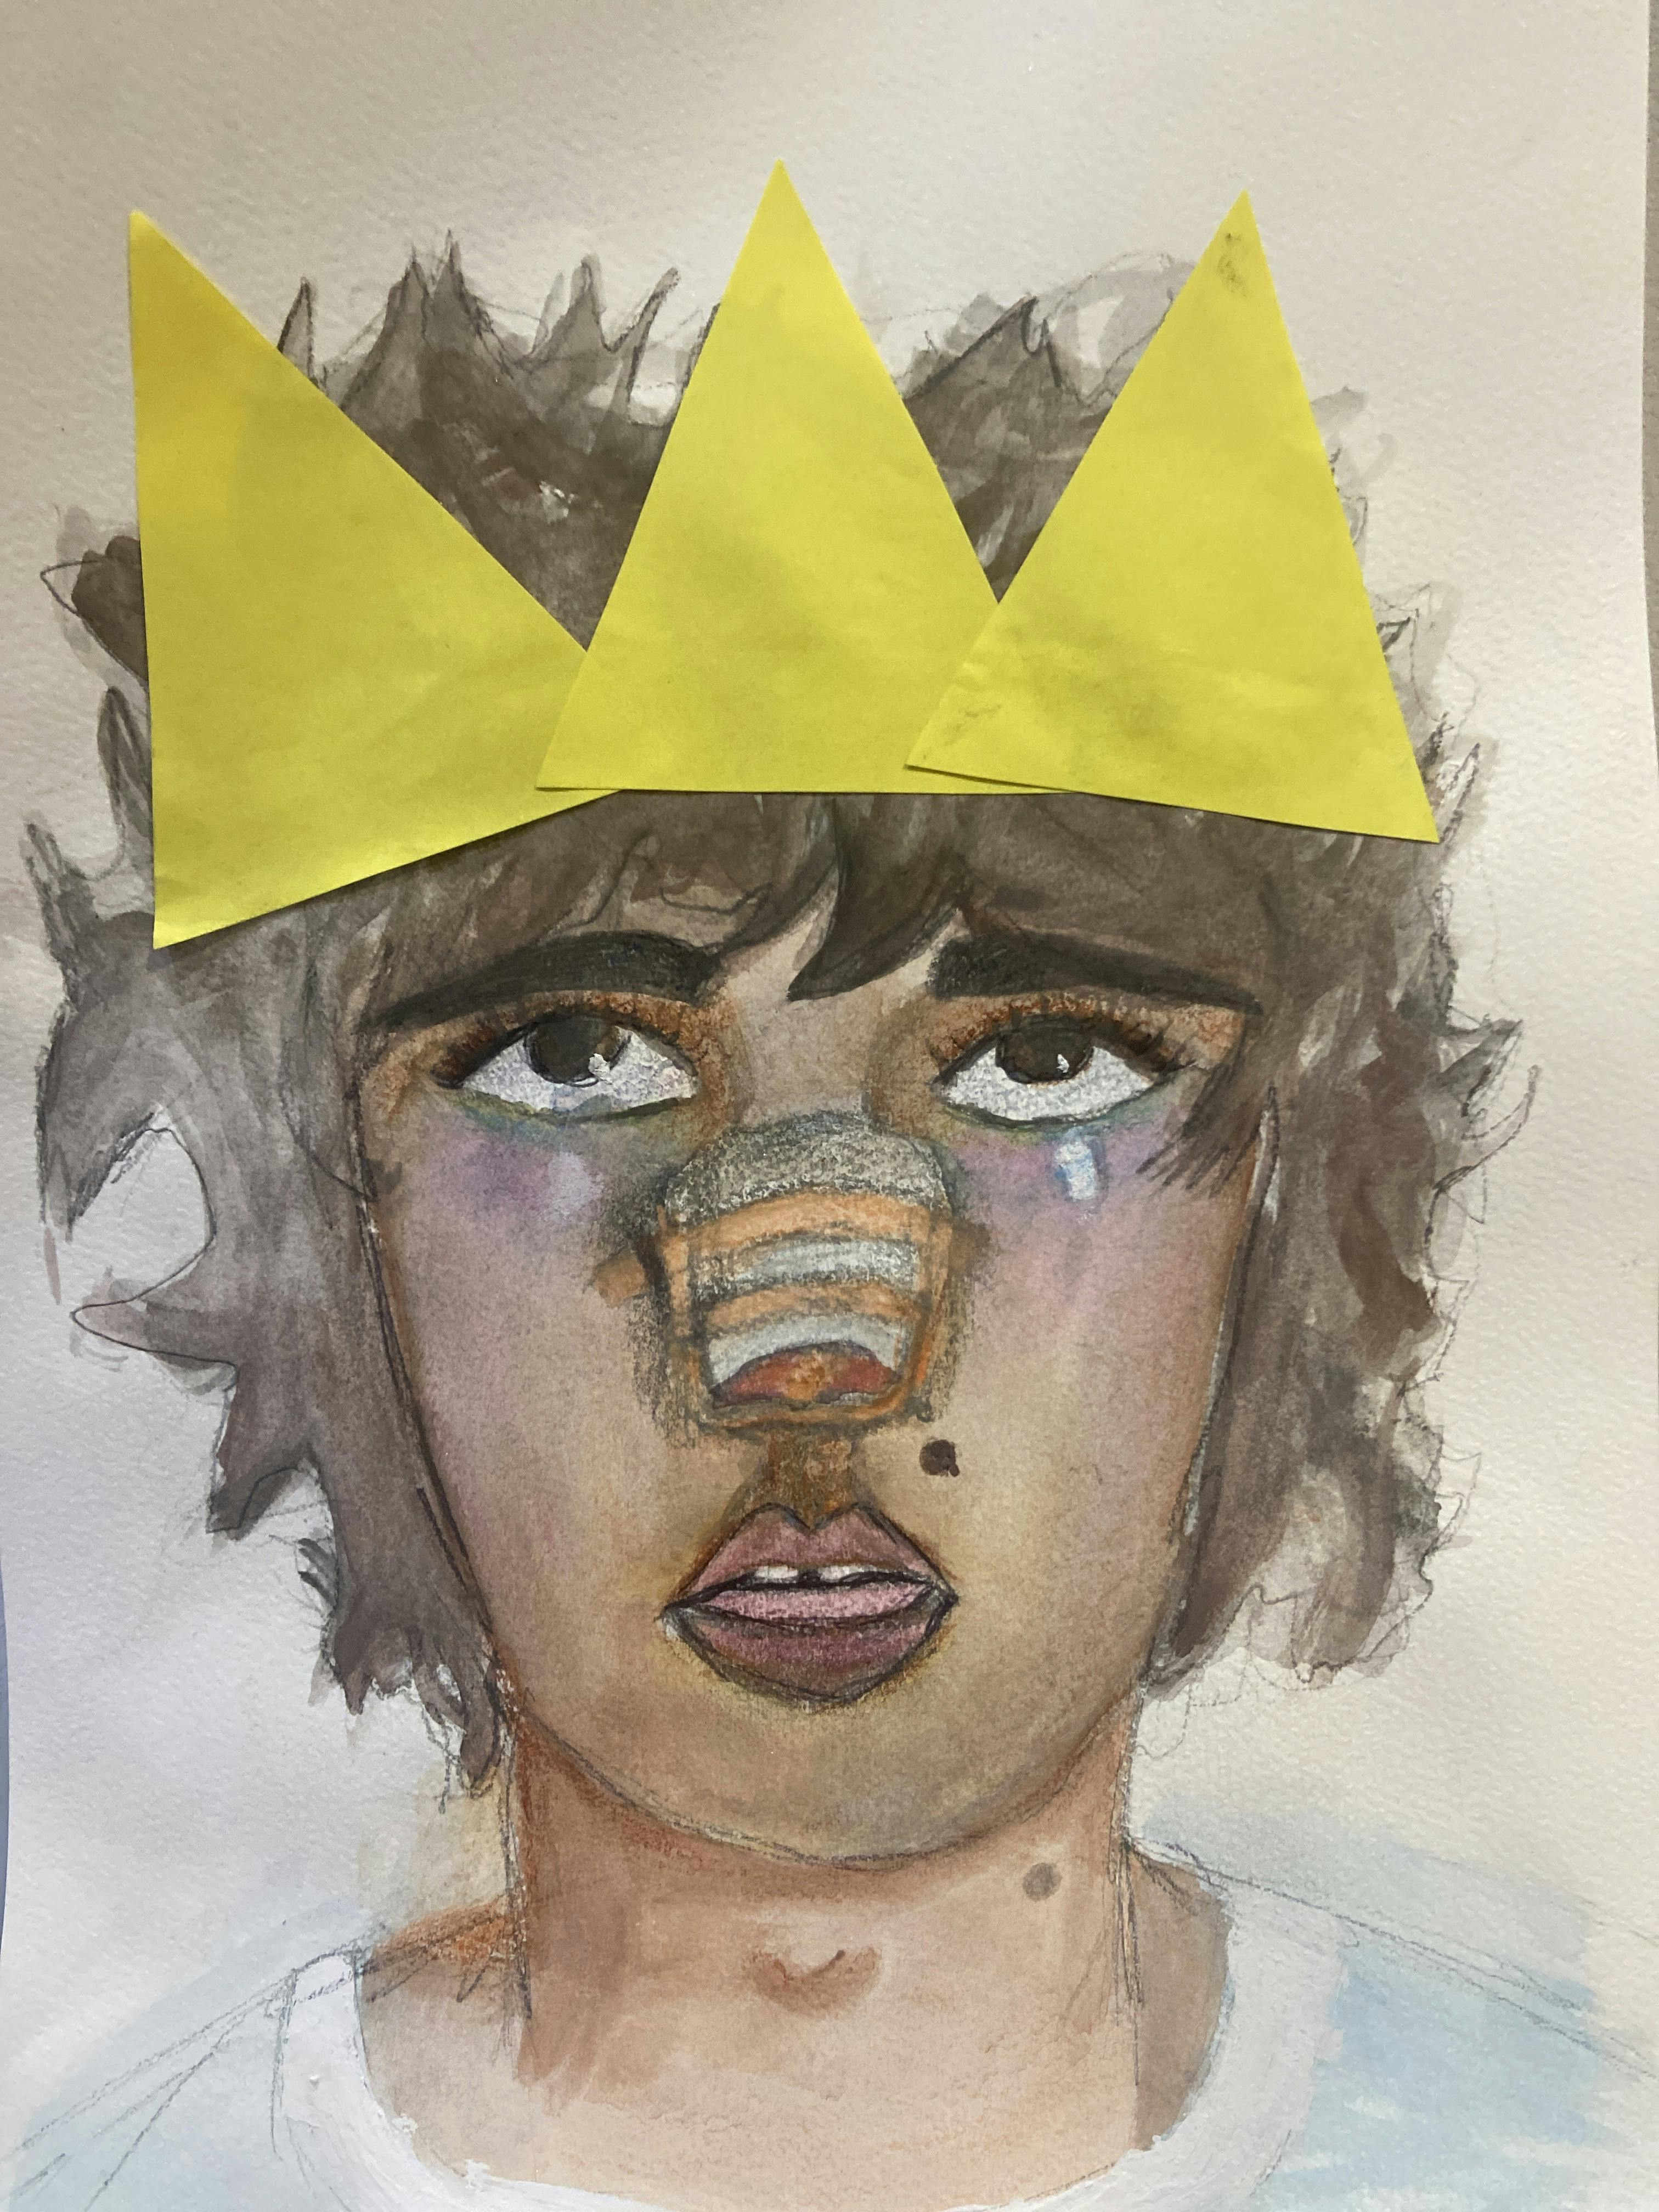 Painting of a person's face wearing a bright yellow collage crown with a bandage on their nose.